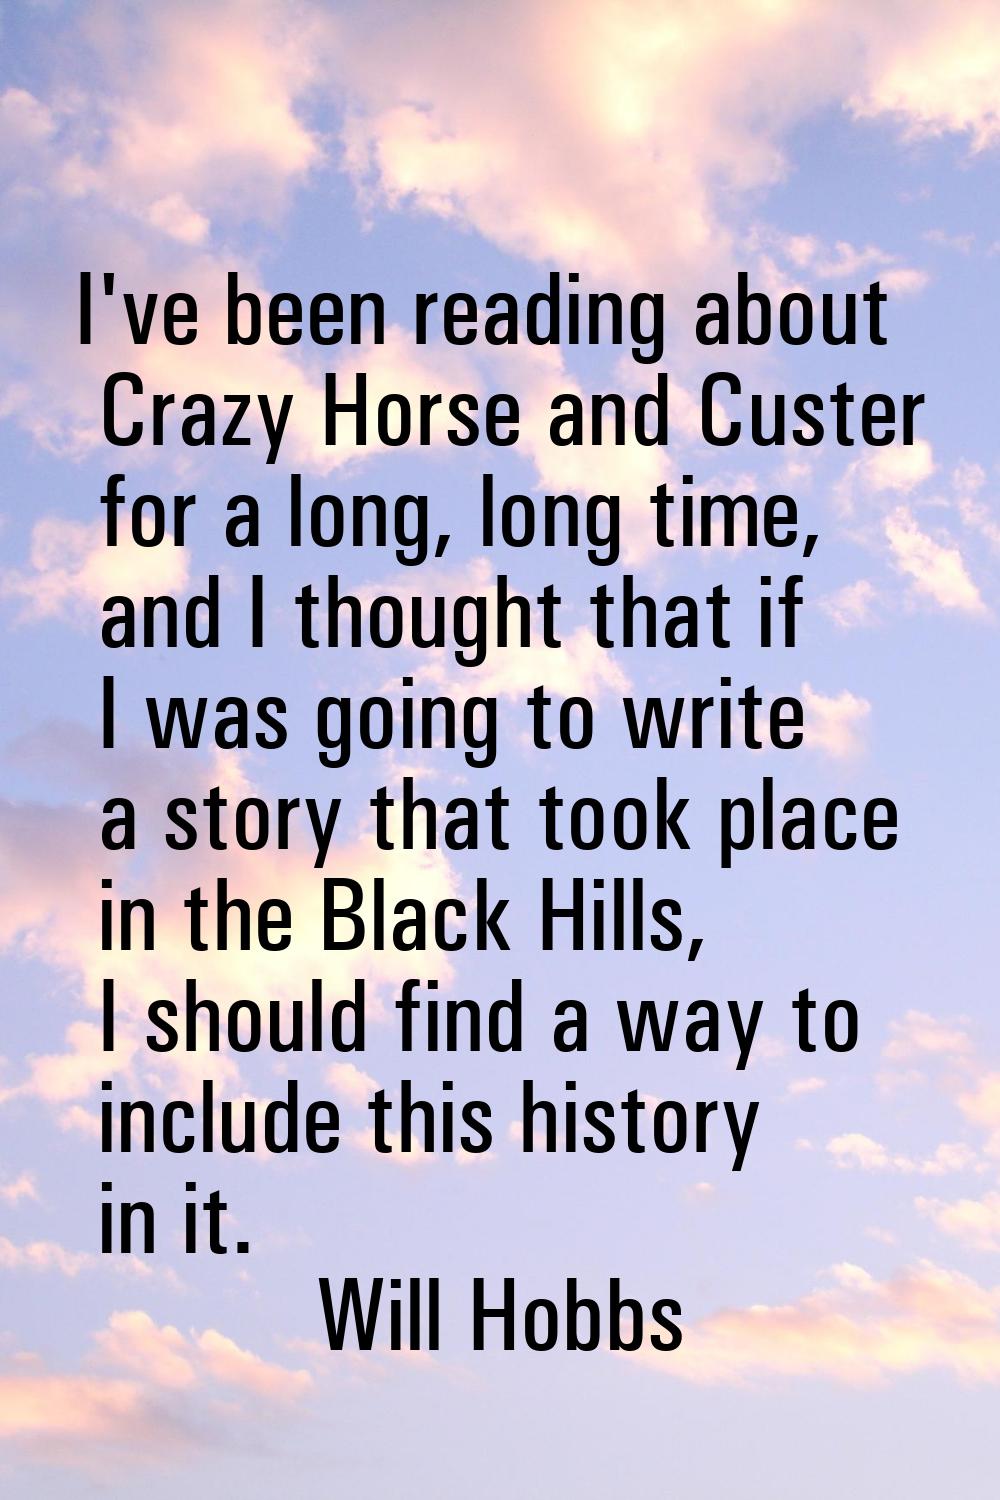 I've been reading about Crazy Horse and Custer for a long, long time, and I thought that if I was g